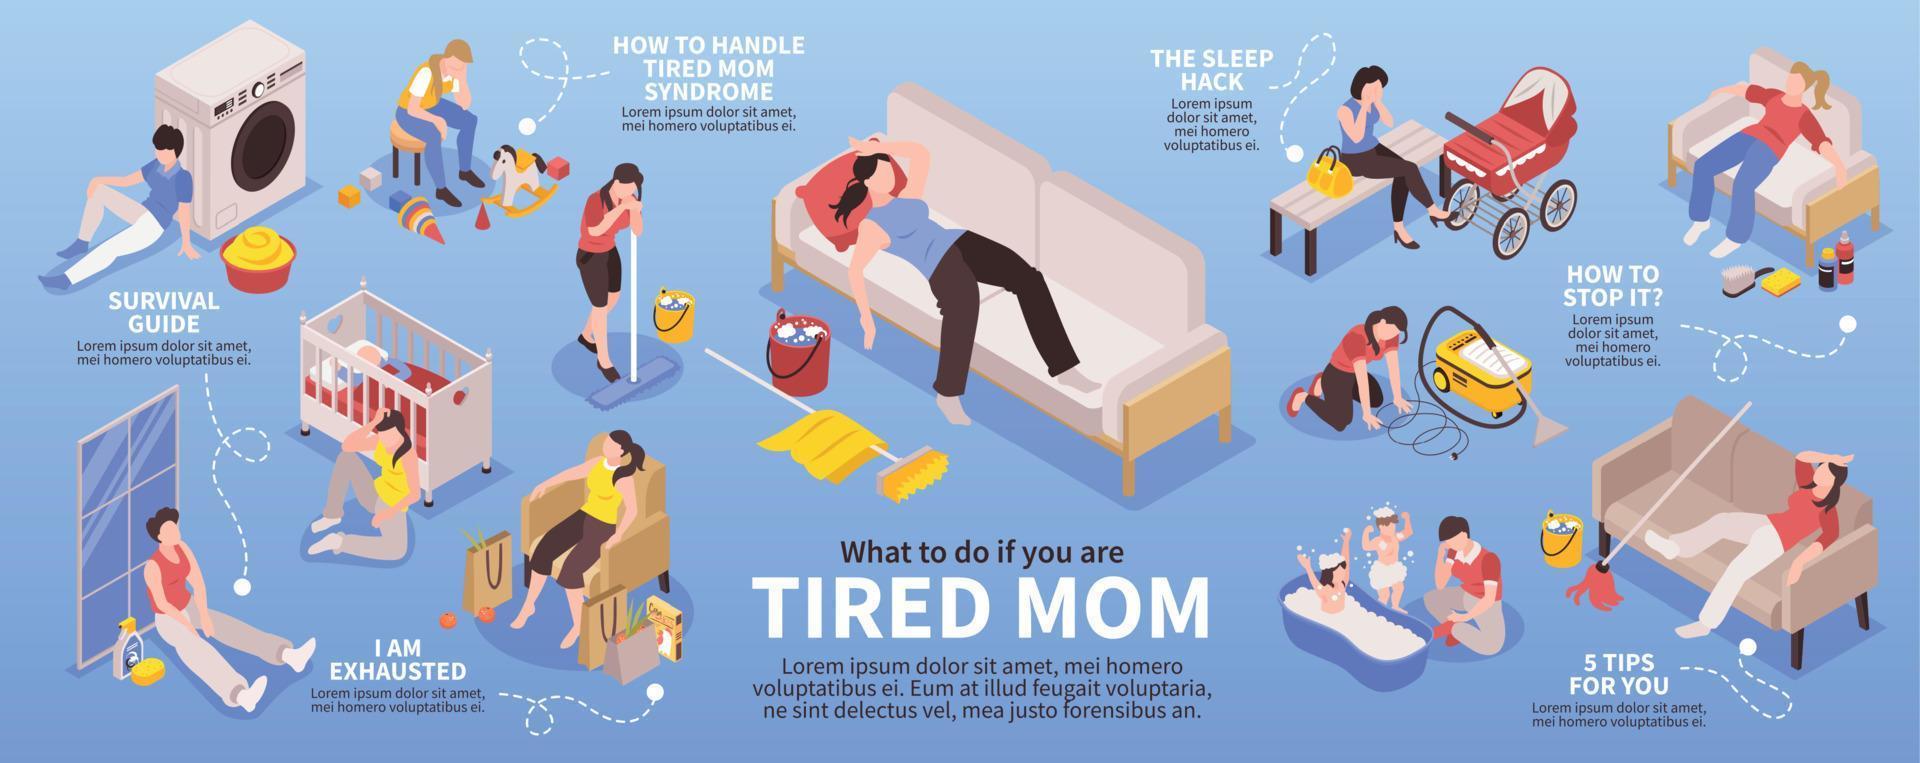 Isometric Tired Mom Concept vector